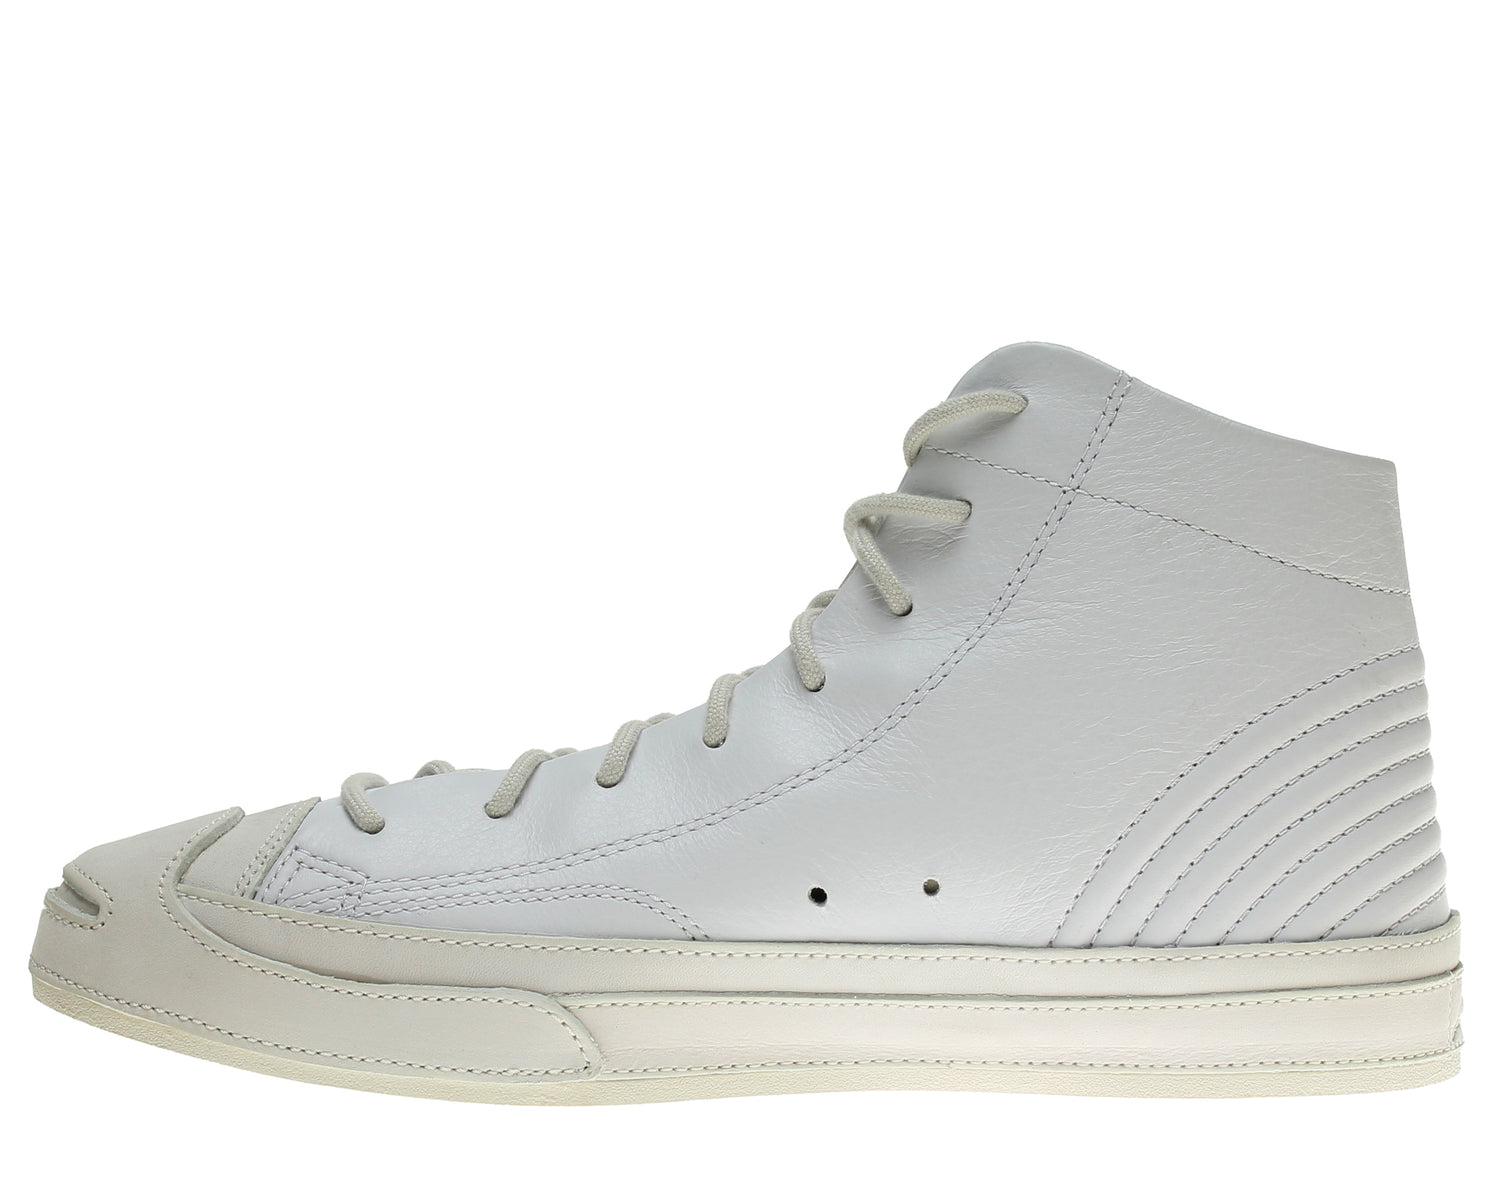 Converse Jack Purcell Quilt High Top Sneakers